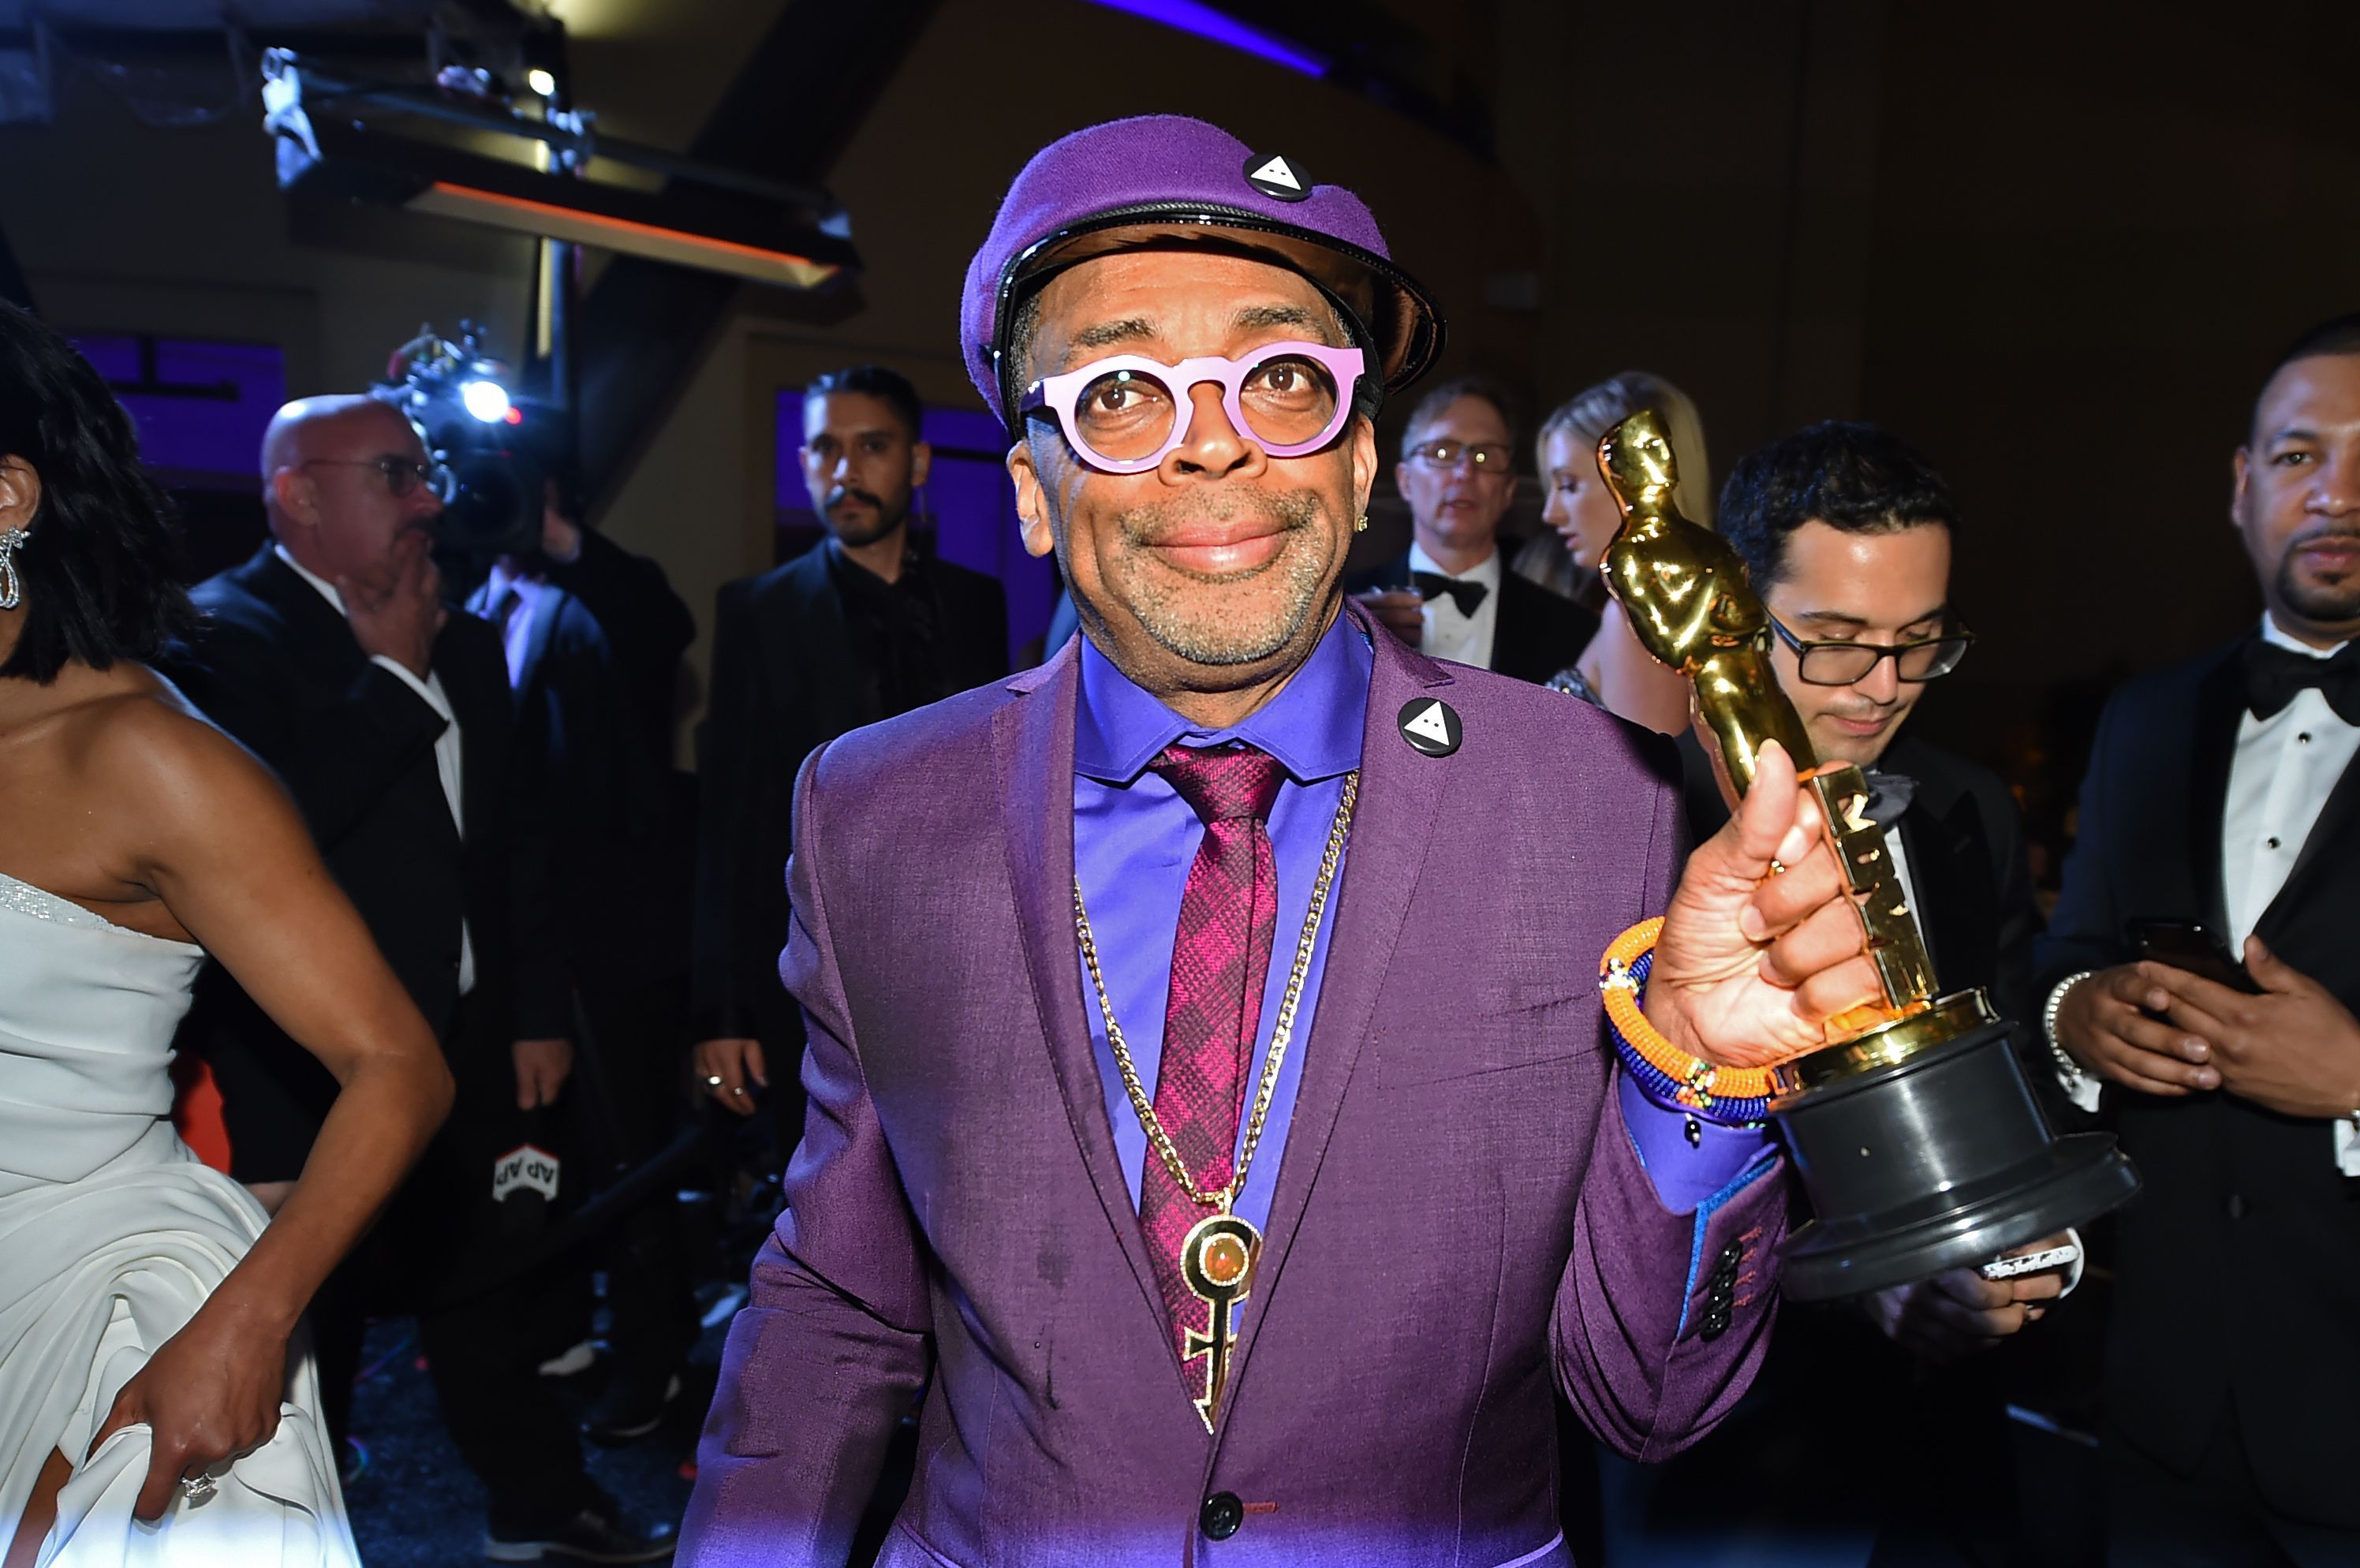 Spike Lee Tried to Leave the Oscars When Green Book Won Best Picture